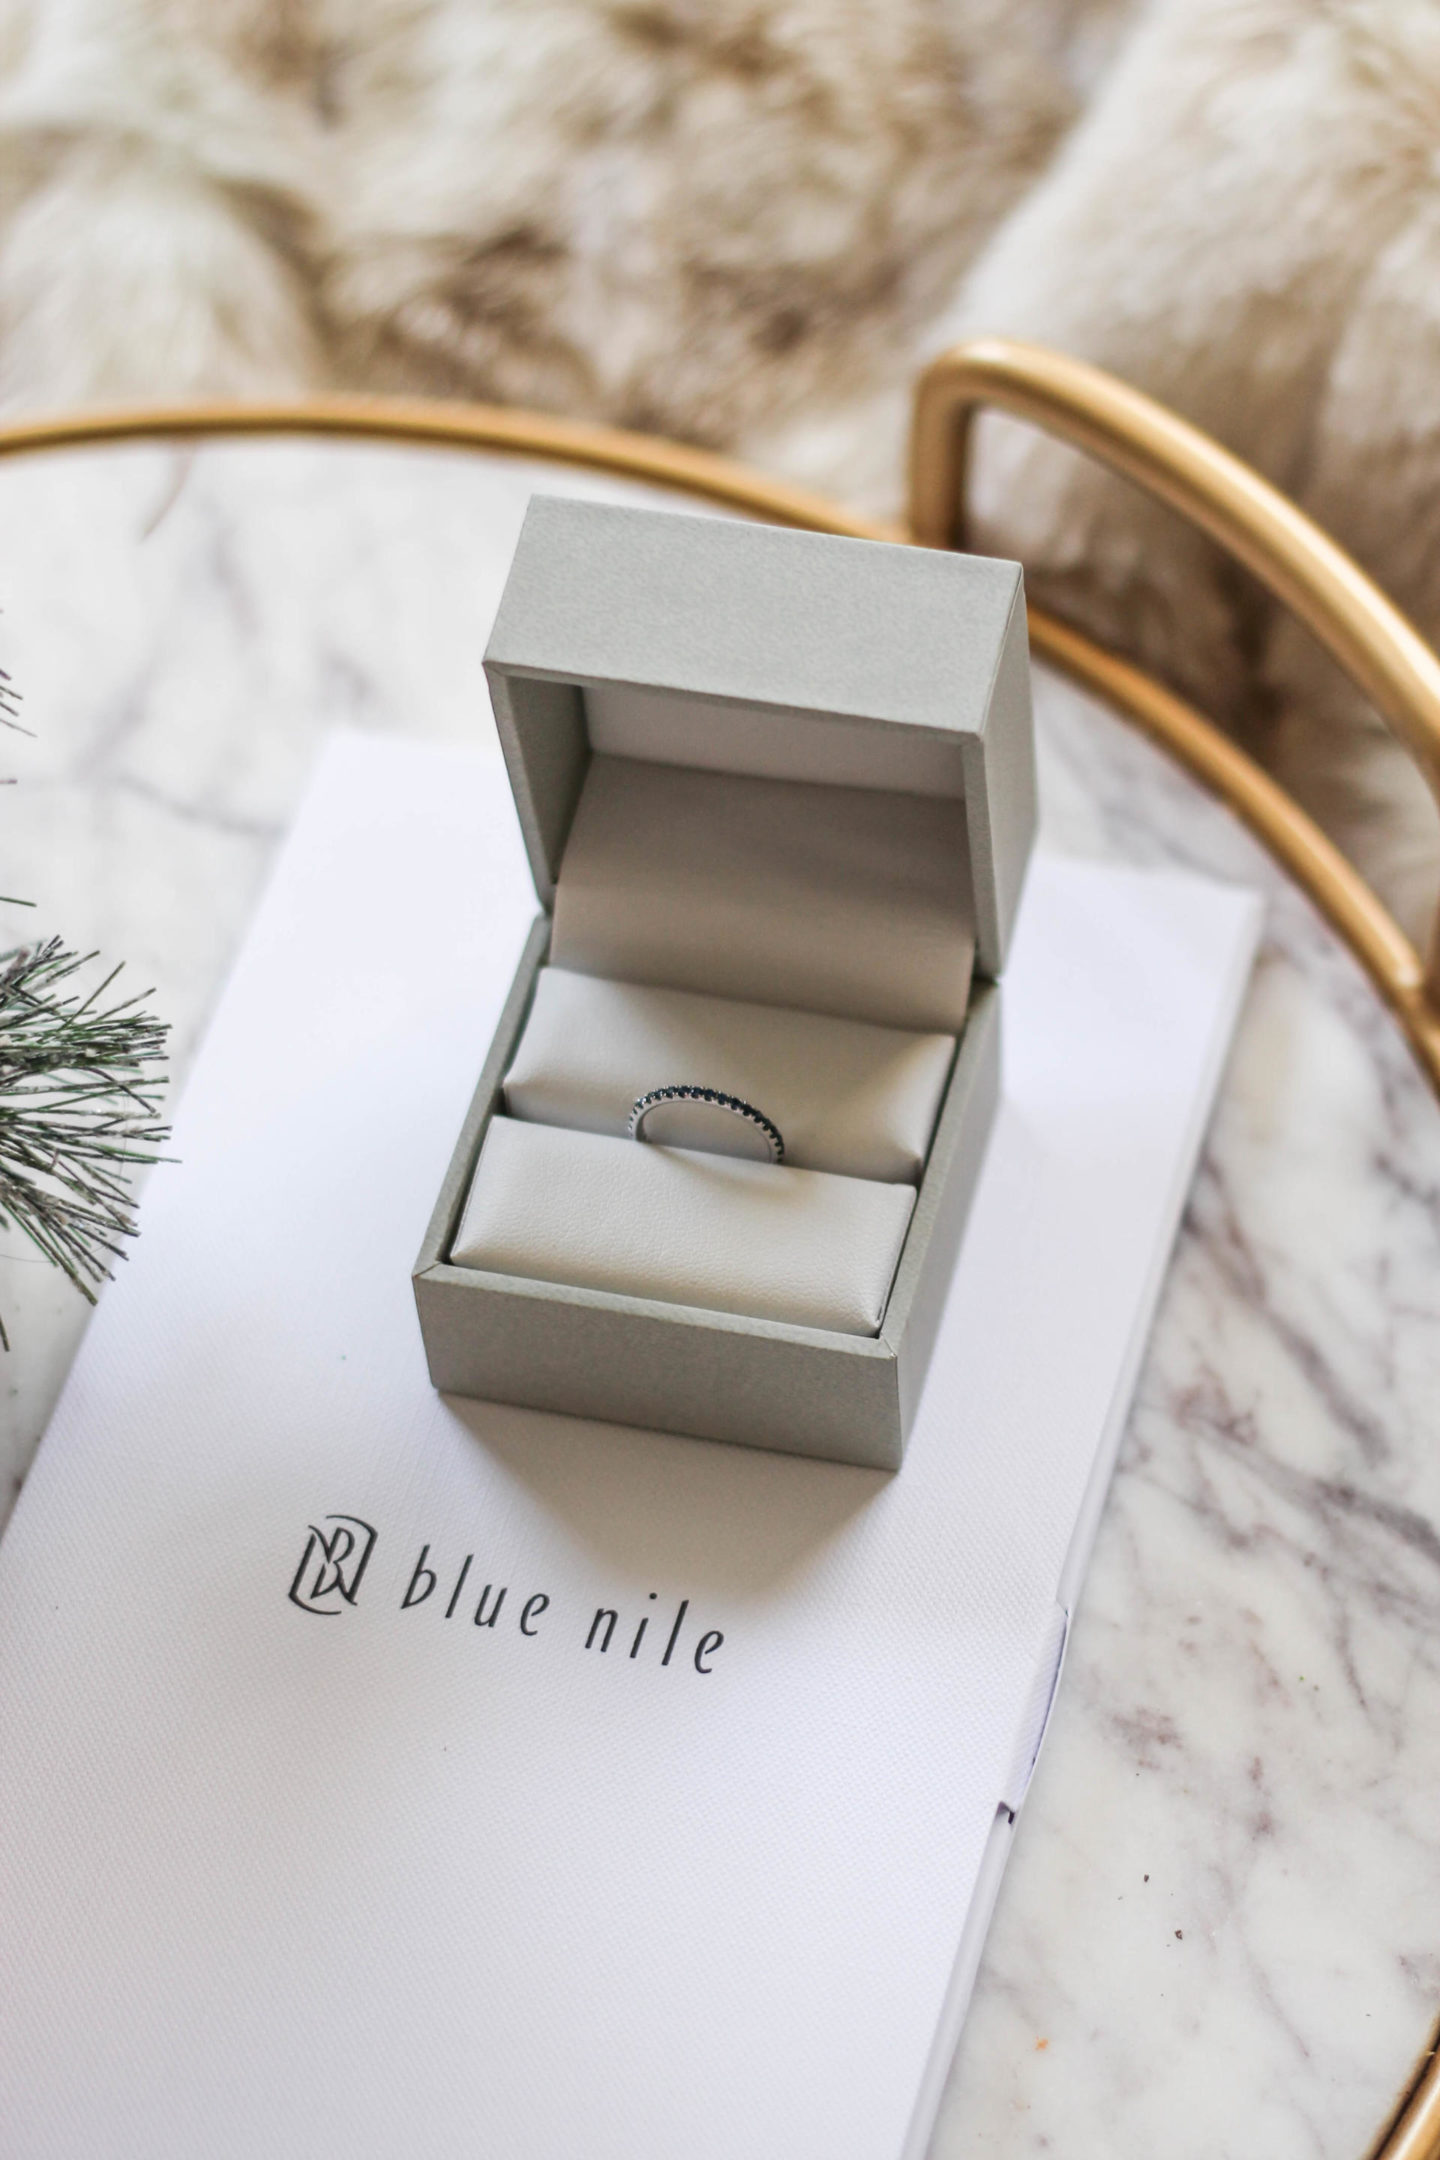 Give Blue Nile Jewelry This Christmas by New York fashion blogger Style Waltz